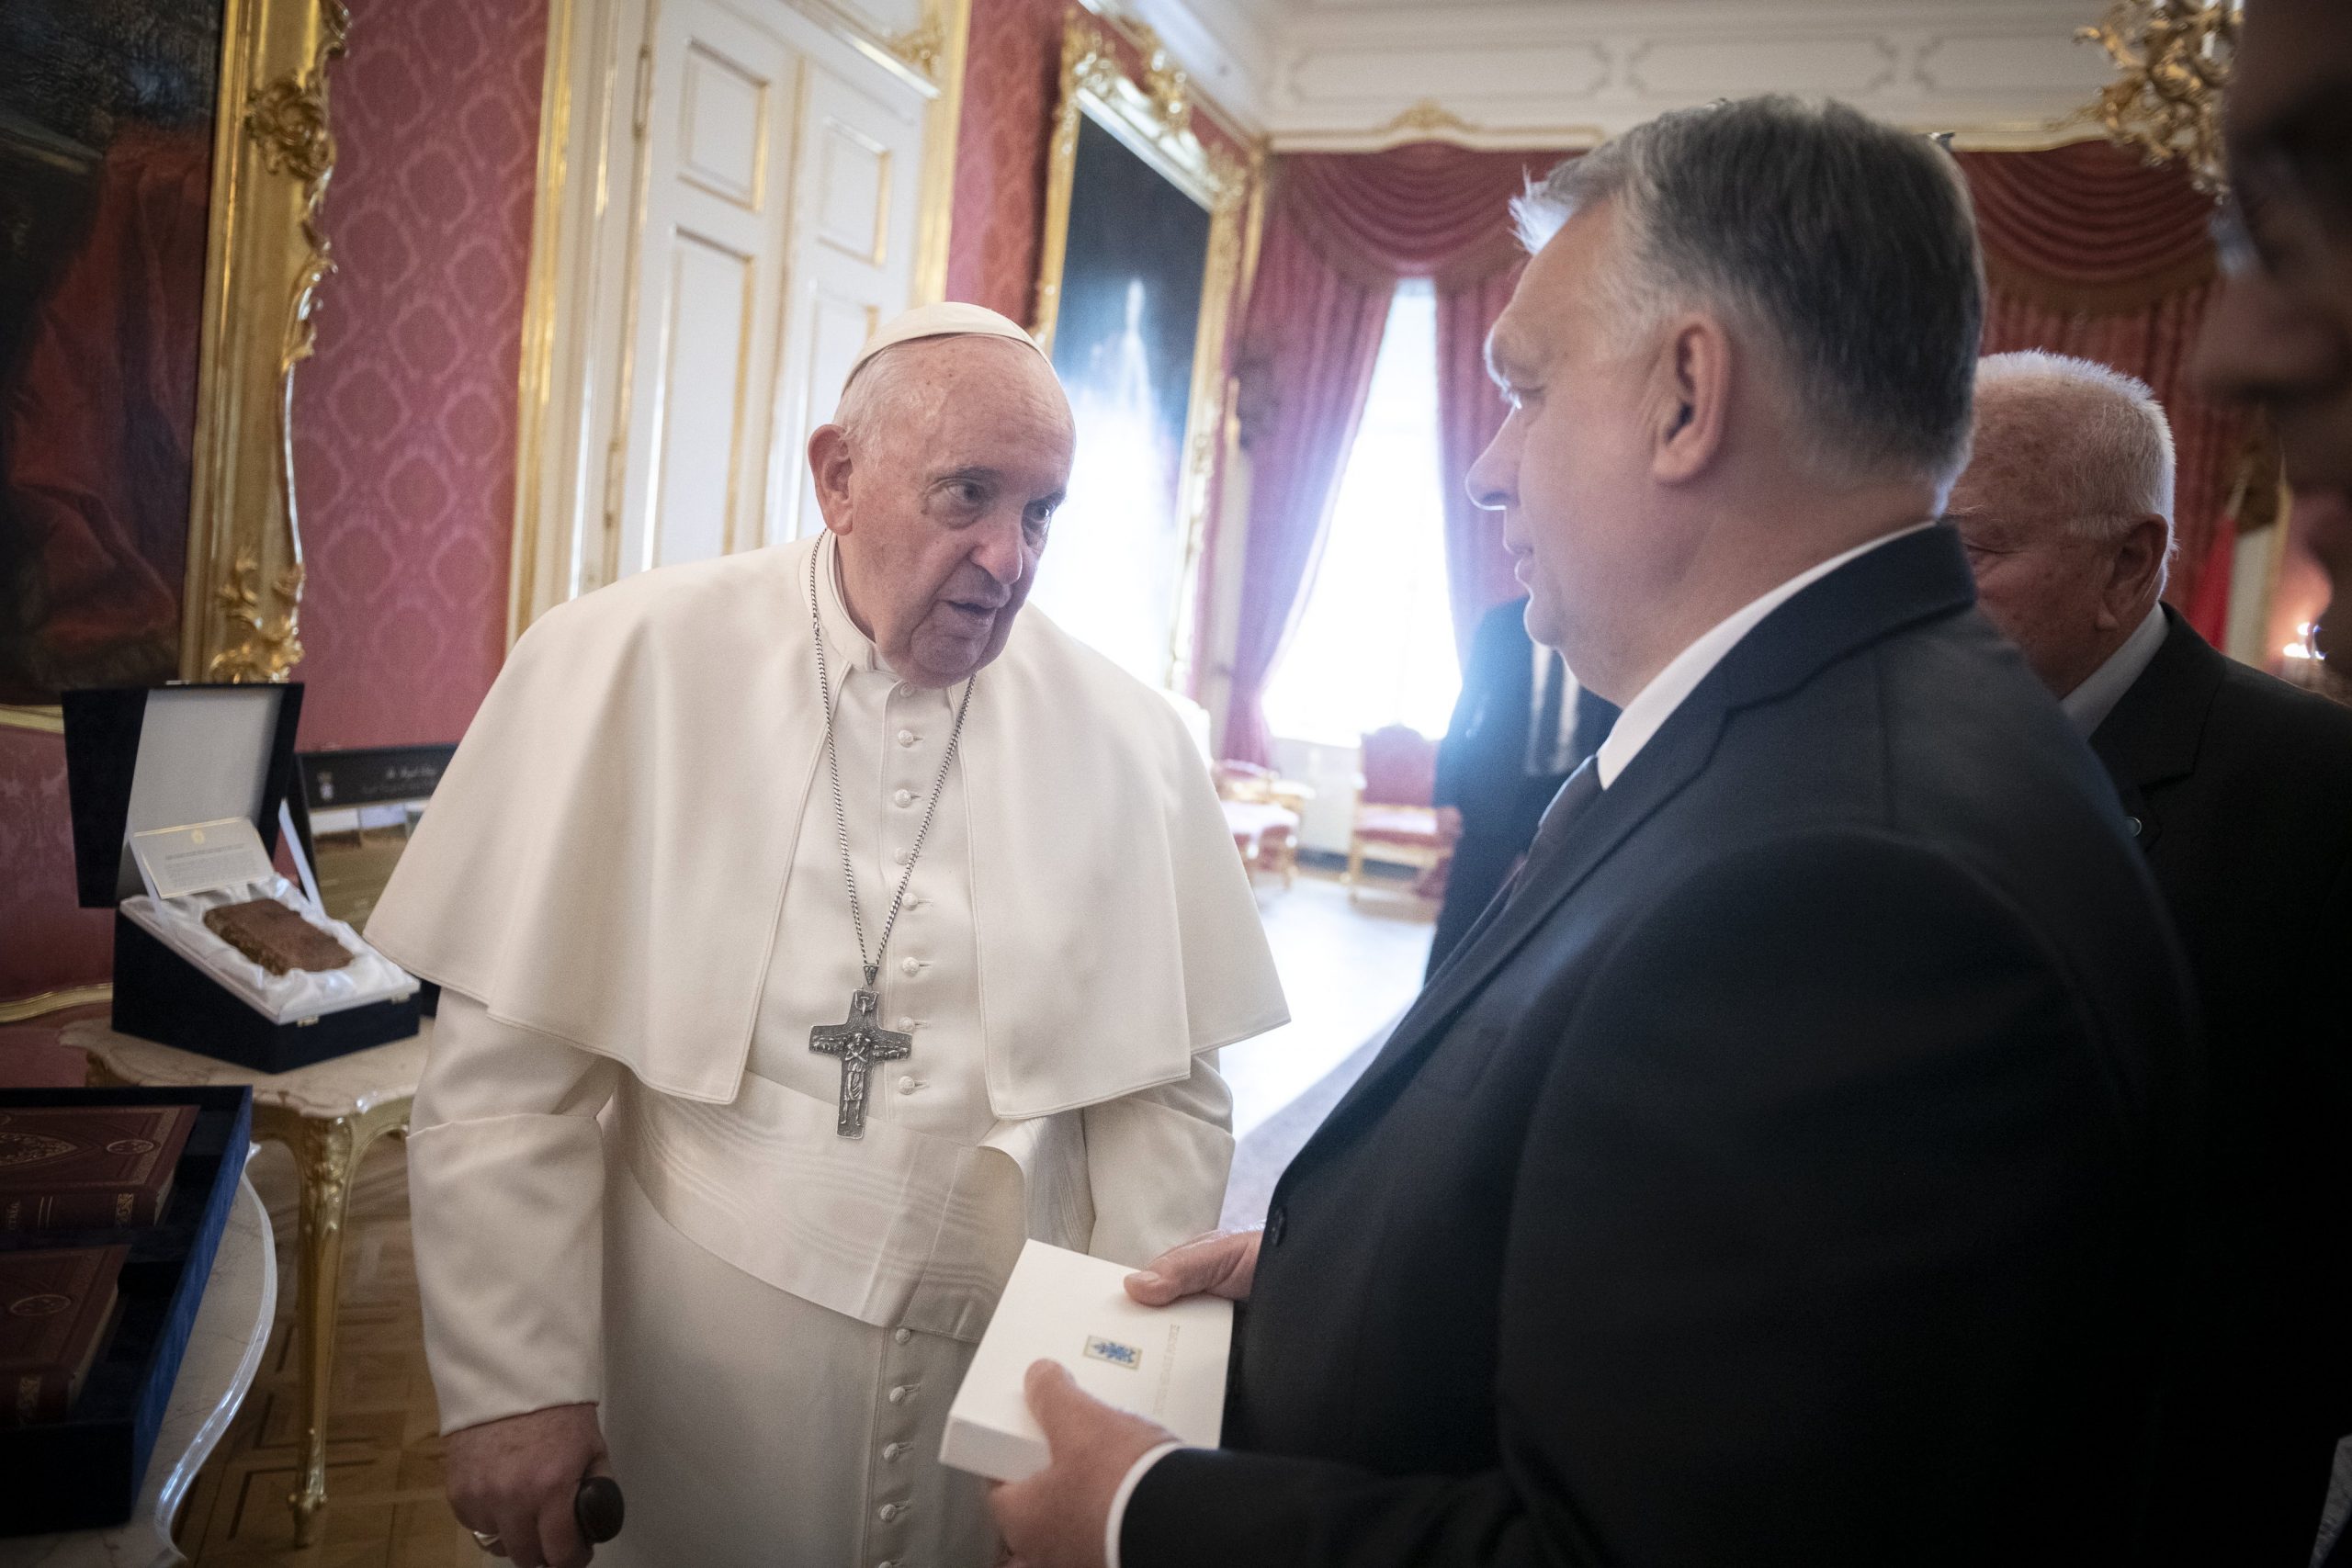 Pope Francis Hints at a Vatican Peace Mission to Ukraine While Leaving Hungary